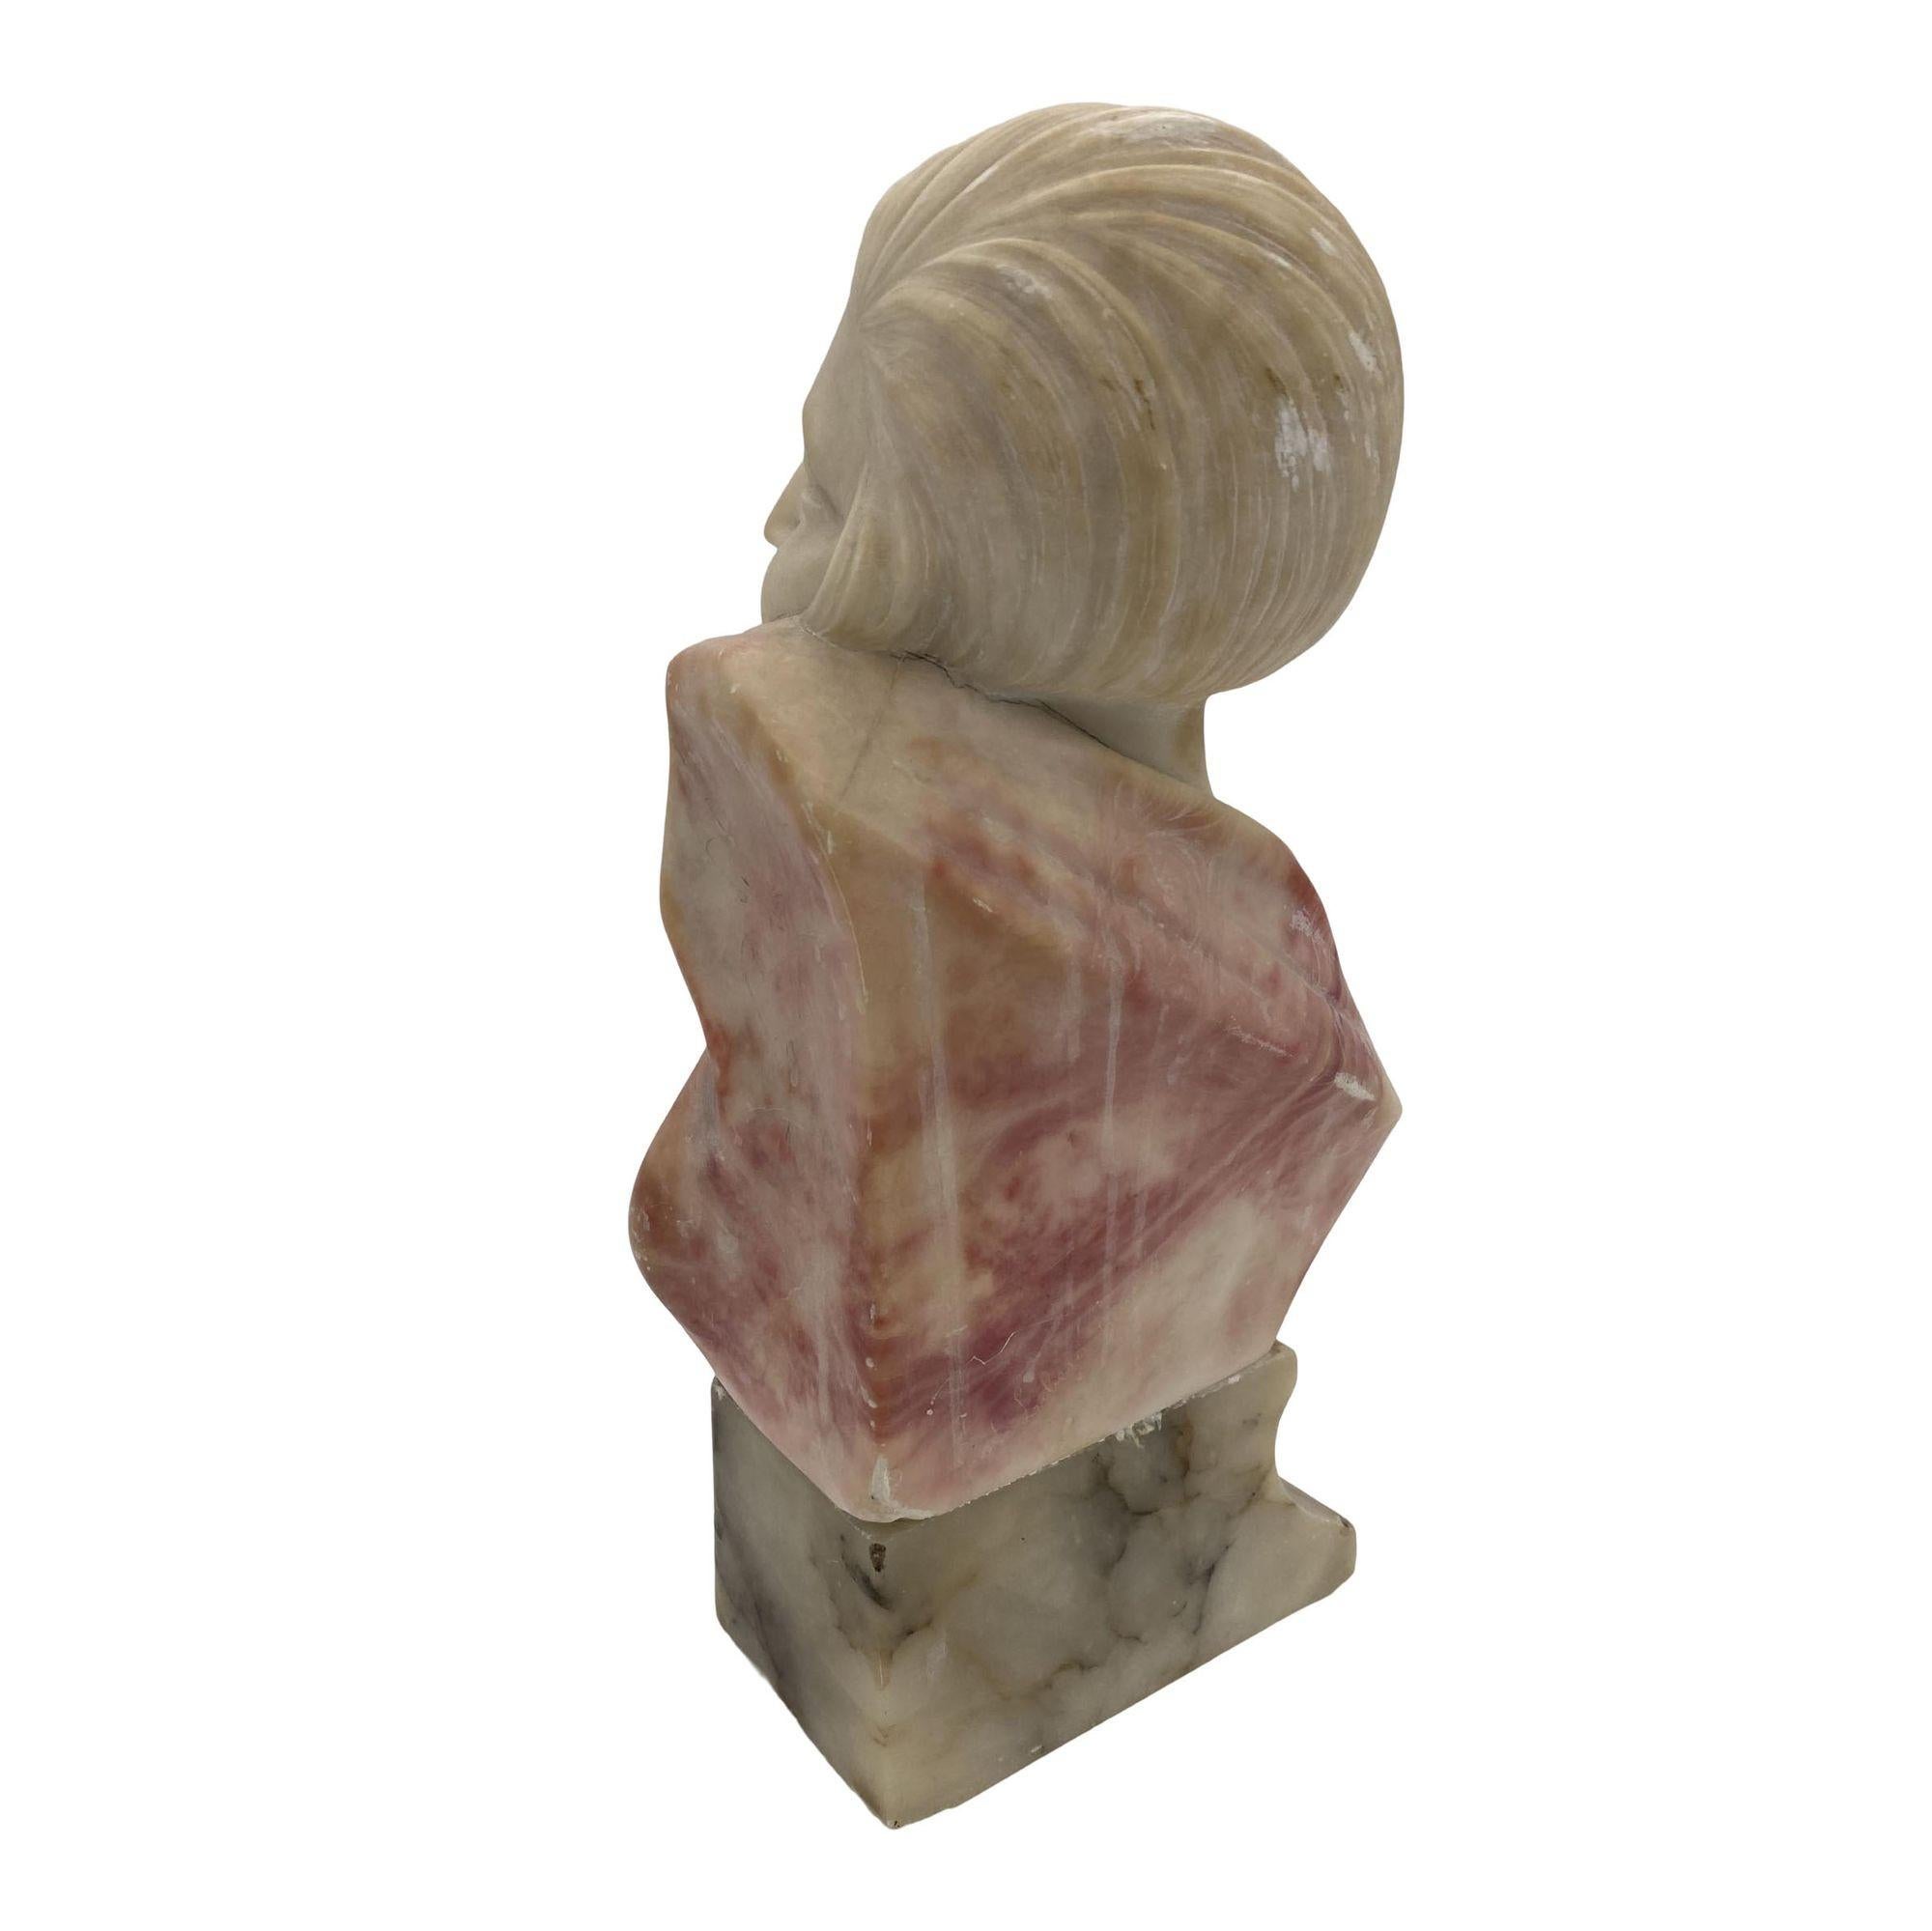 Original hand carved Art Deco bust of a young smiling Flapper woman. Worked out of Fine alabaster the sculptor has a two-tone look with the woman carved in white alabaster and her clothing carved in red alabaster. There is a great amount of detail